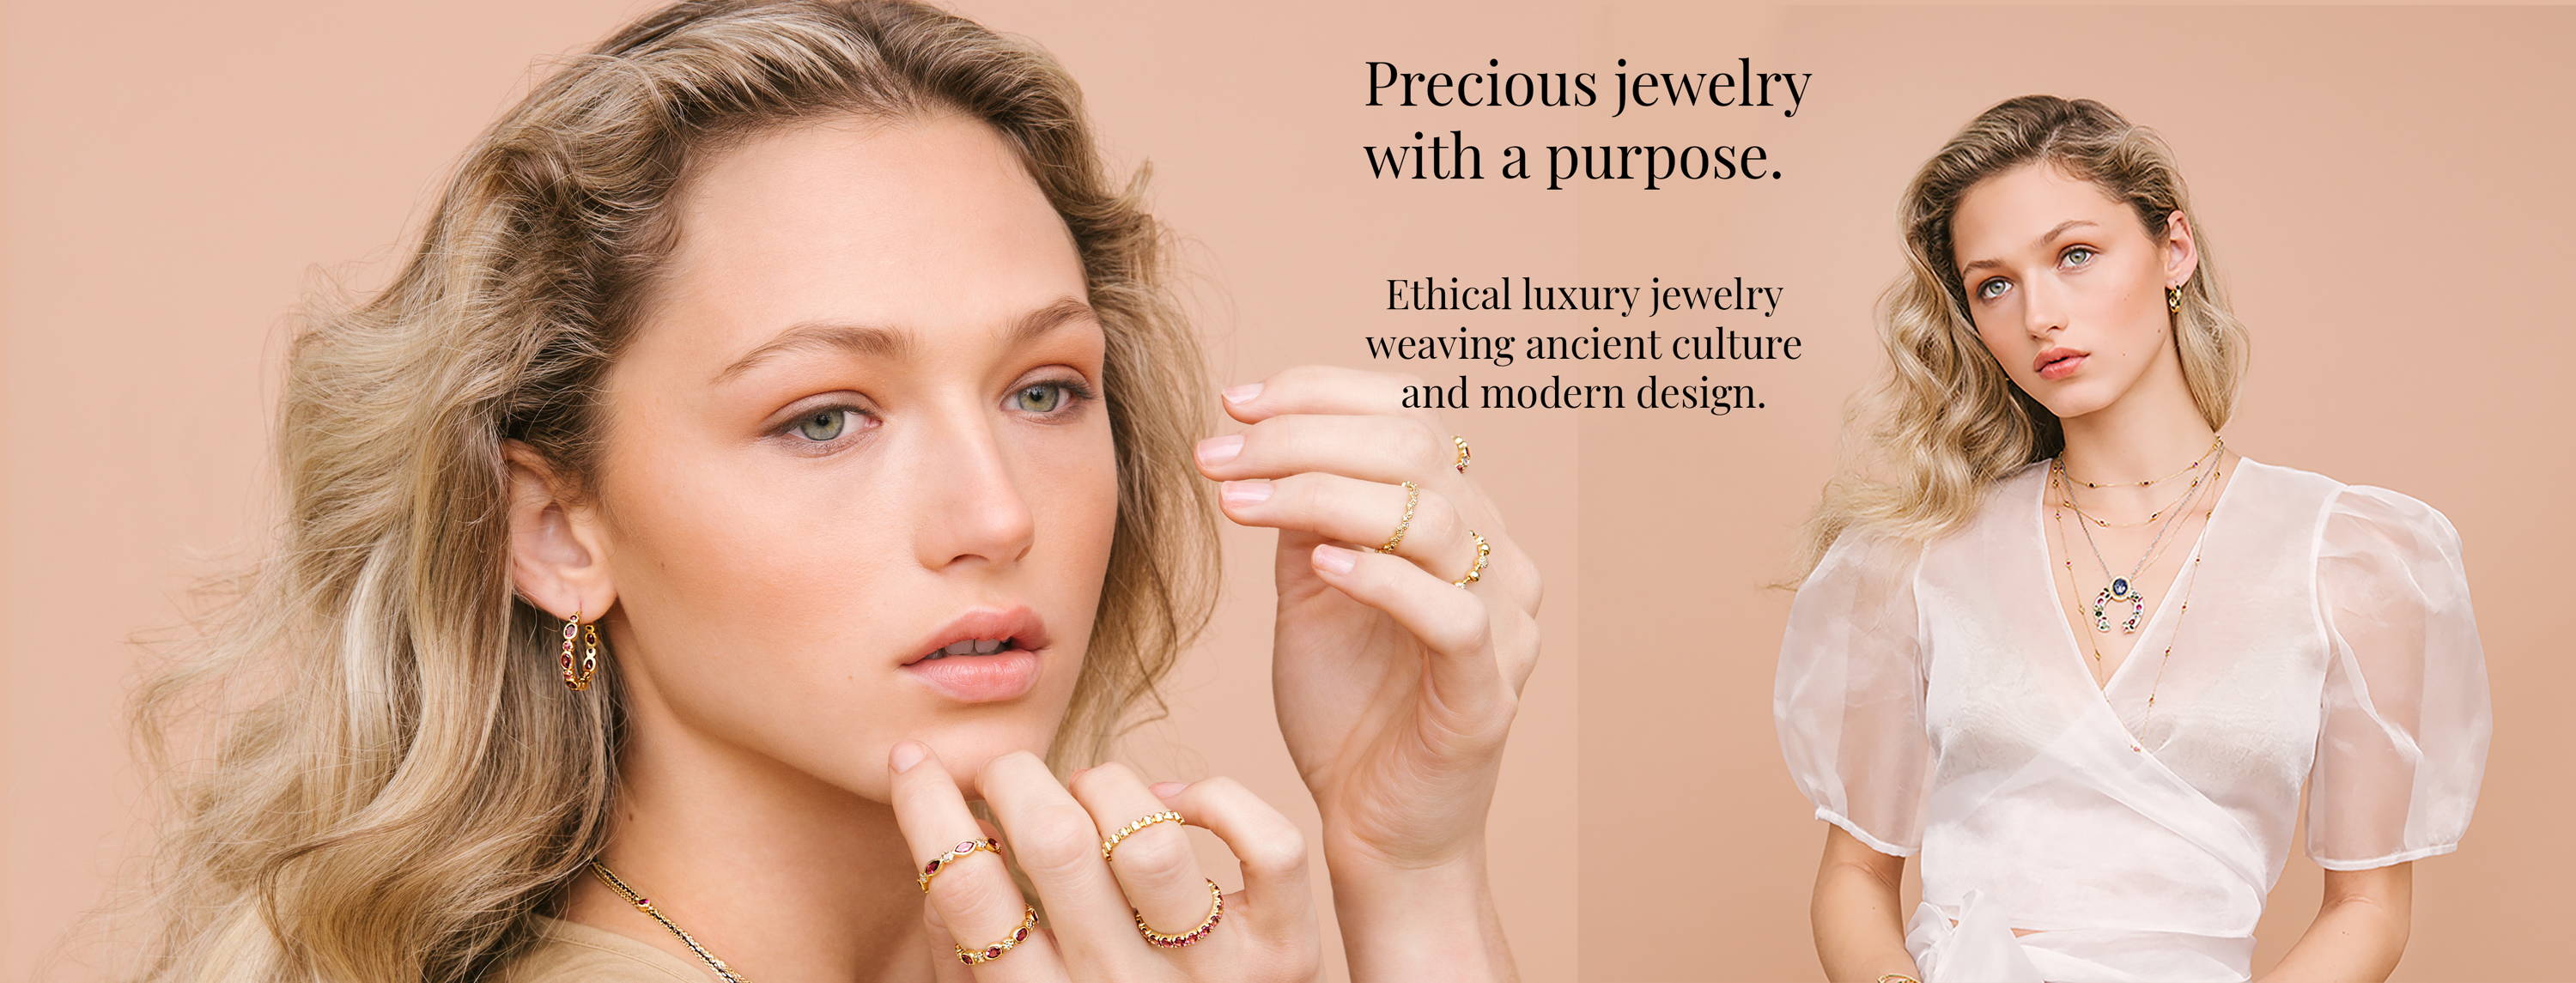 Precious jewelry with a purpose. Ethical luxury jewelry weaving ancient culture and modern design.